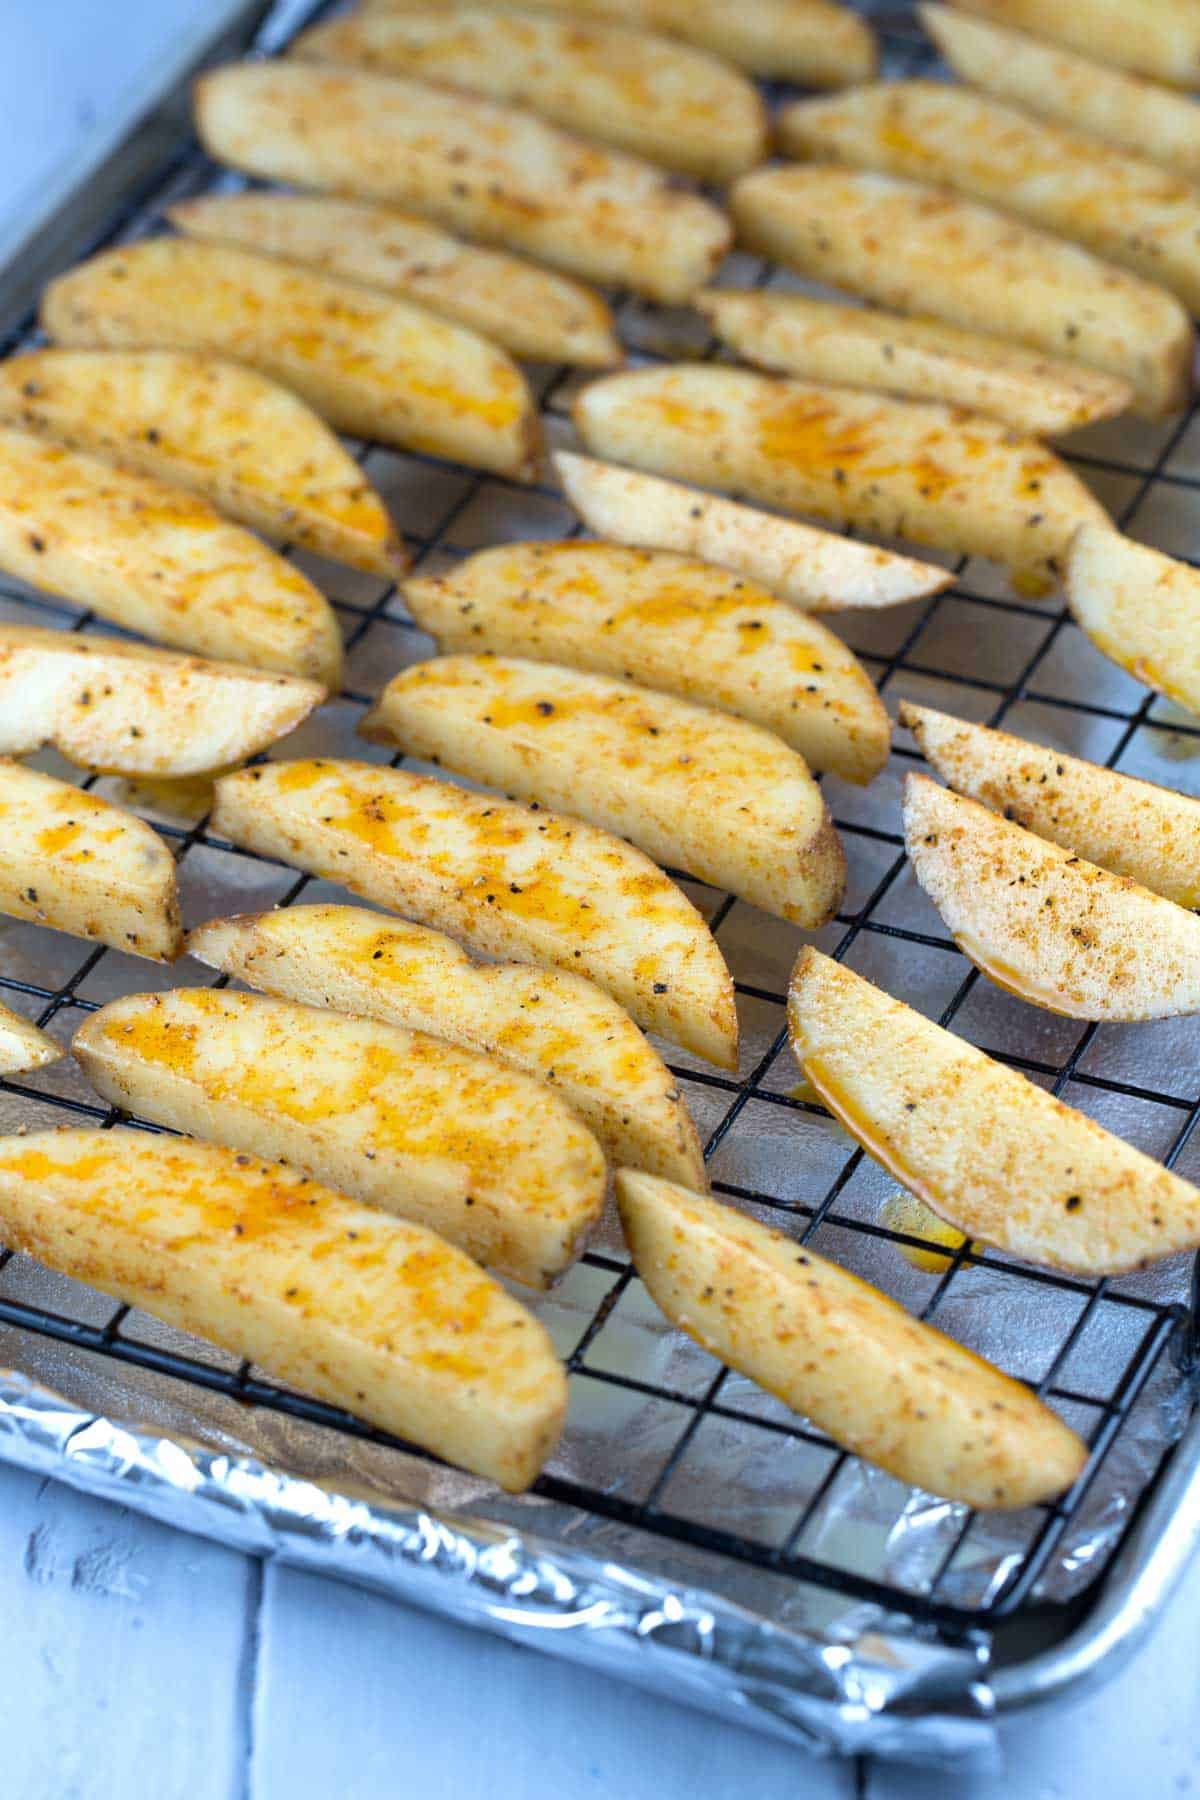 Potato Wedges In Oven
 Oven Baked Potato Wedges with Dipping Sauce